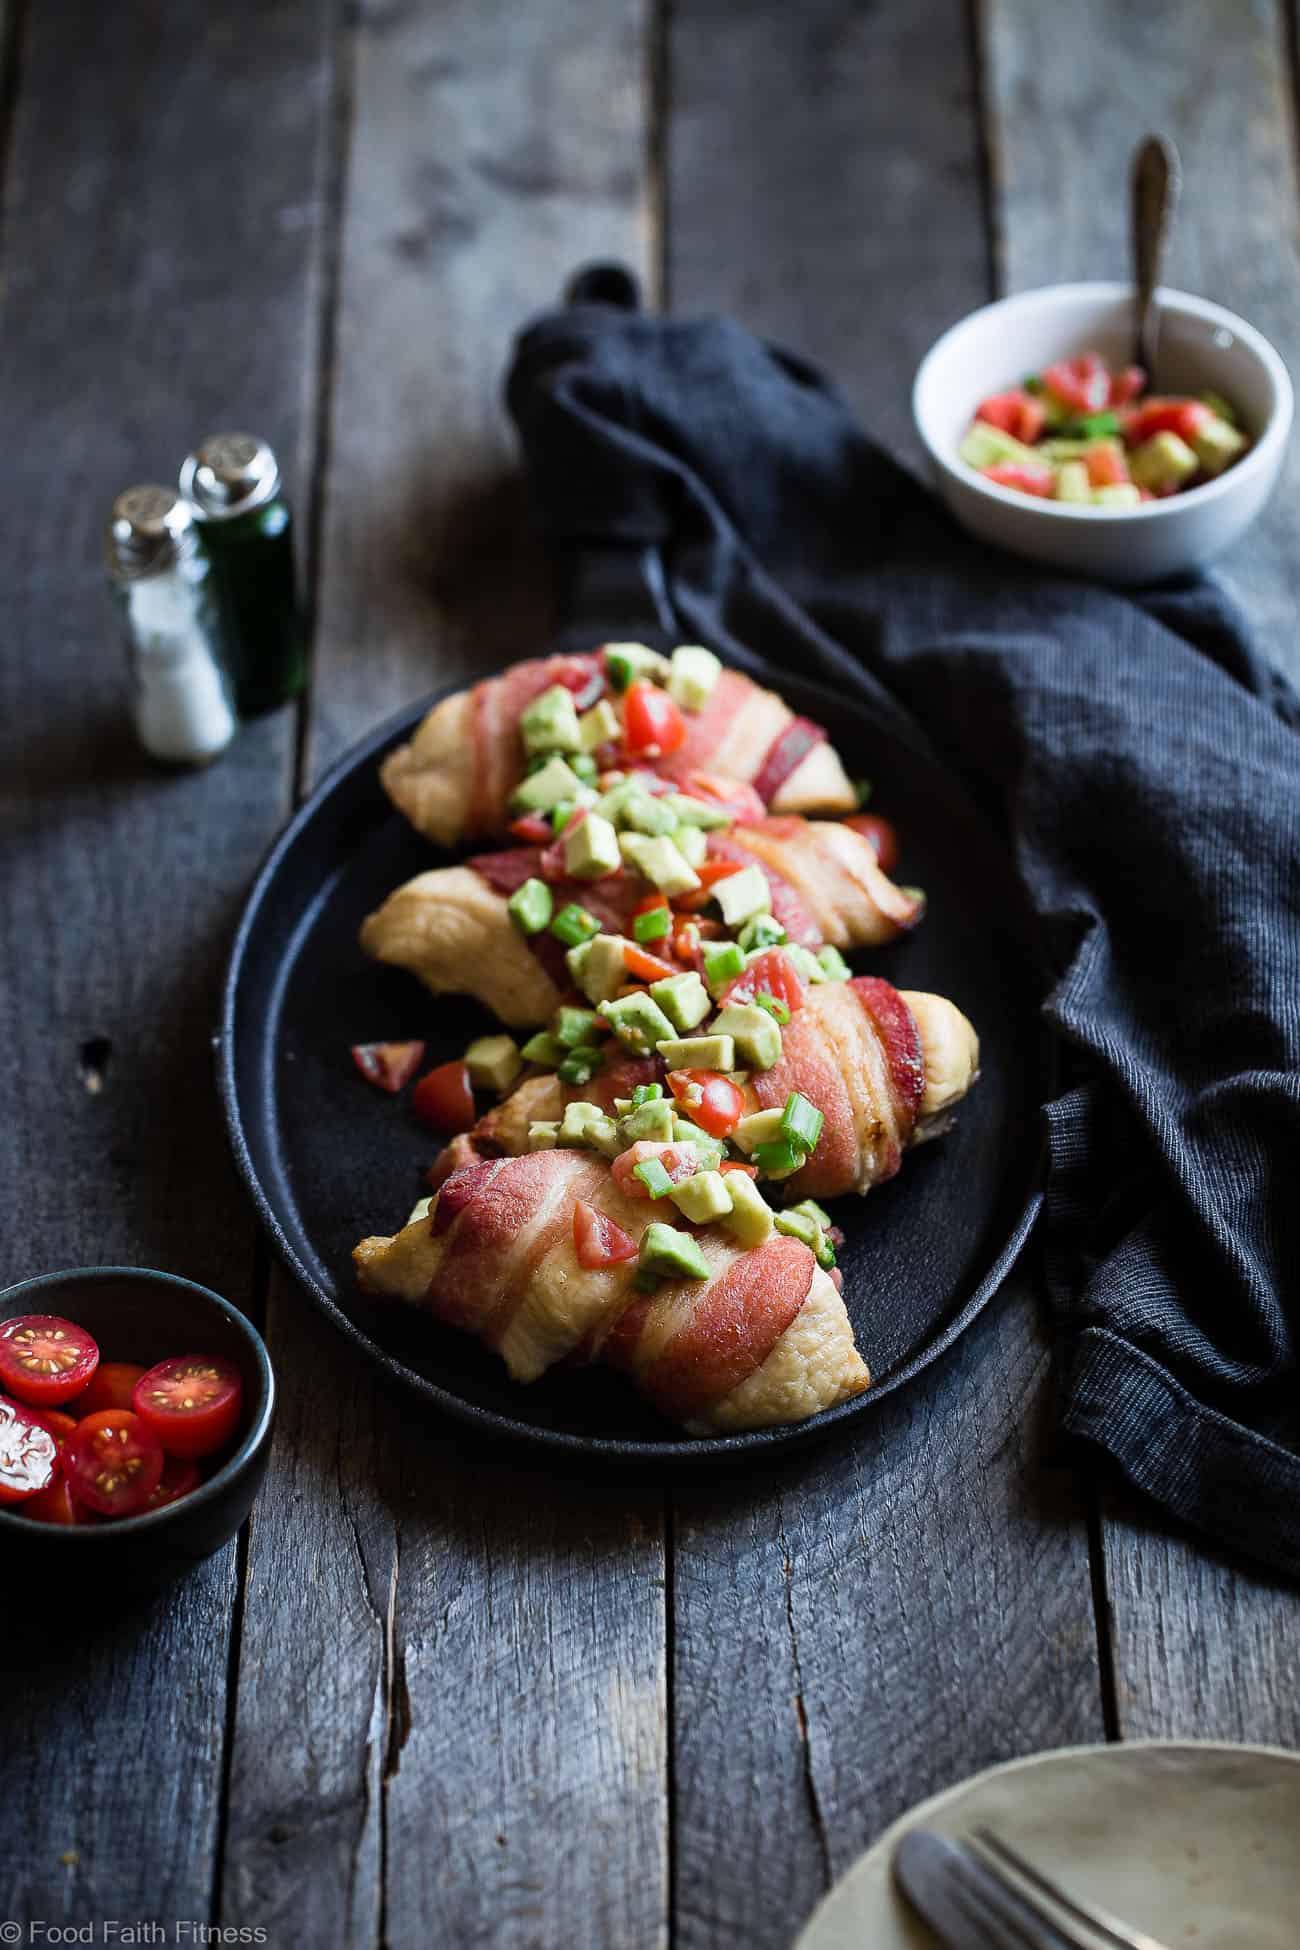 Whole30 Oven Baked Bacon Wrapped Chicken Recipe - with a CREAMY, addicting avocado salsa, this is one quick and easy, kid friendly dinner that's paleo, keto and whole30 compliant! | Foodfaithfitness.com | @FoodFaithFit